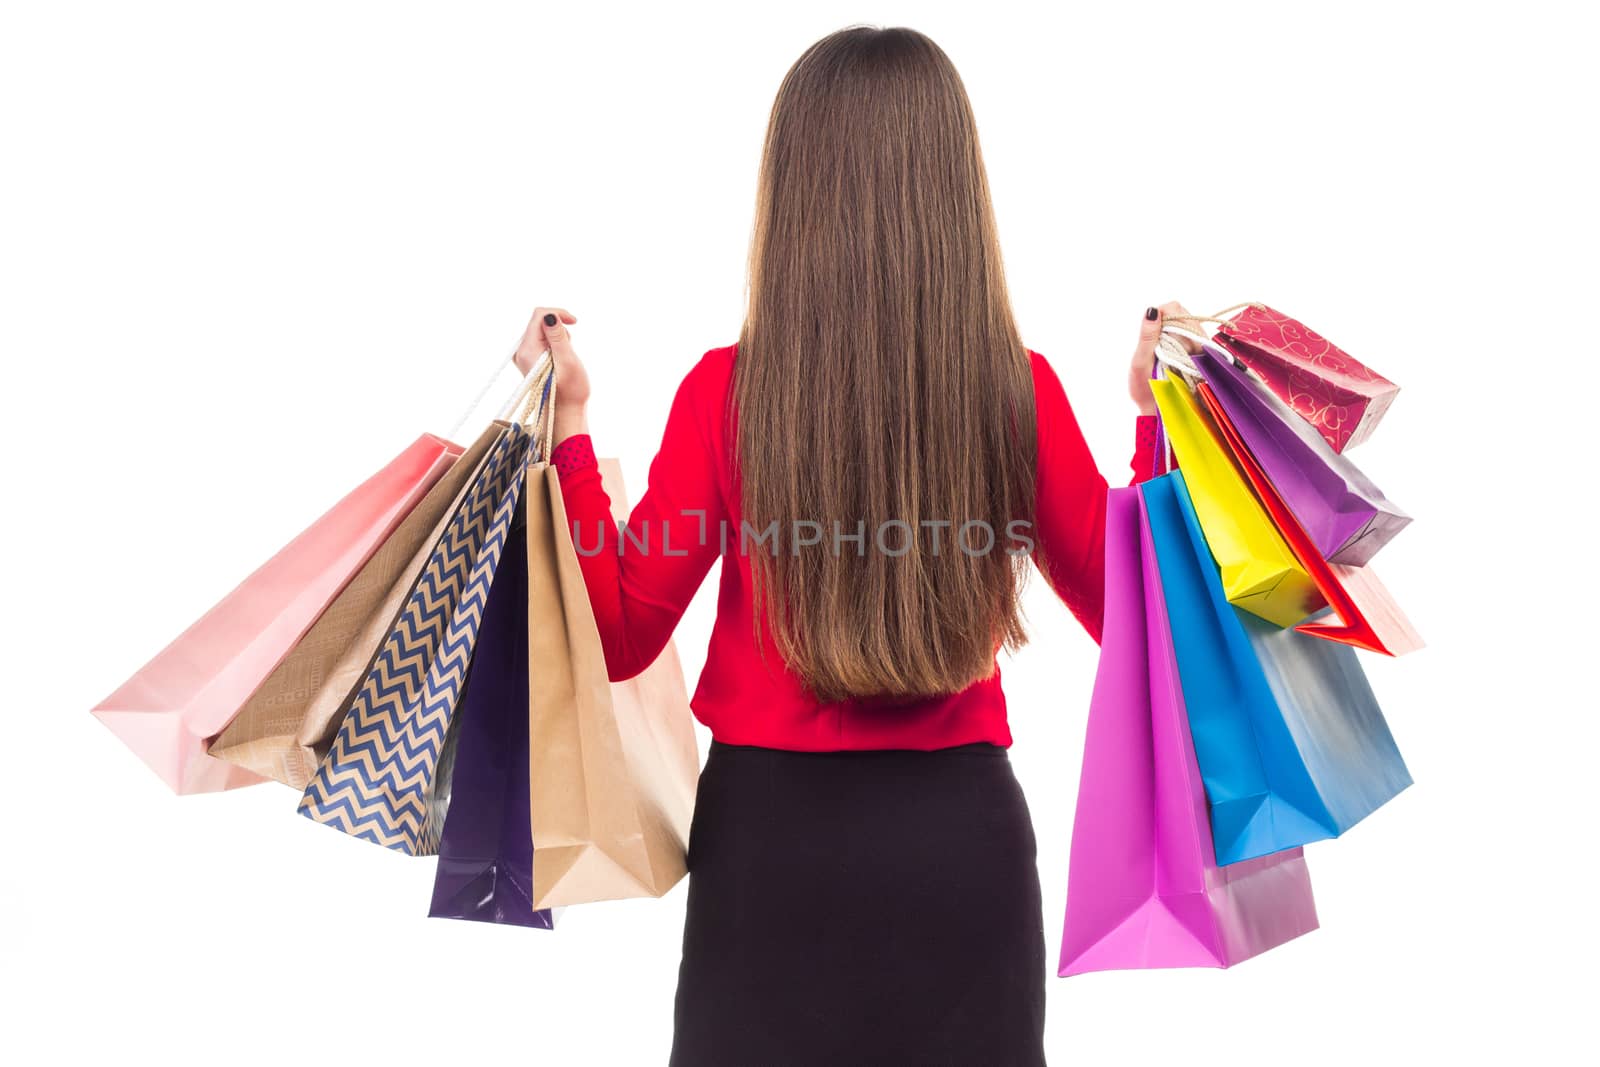 Long-haired young woman wearing red blouse and black skirt from her back holds colourful shopping paper bags